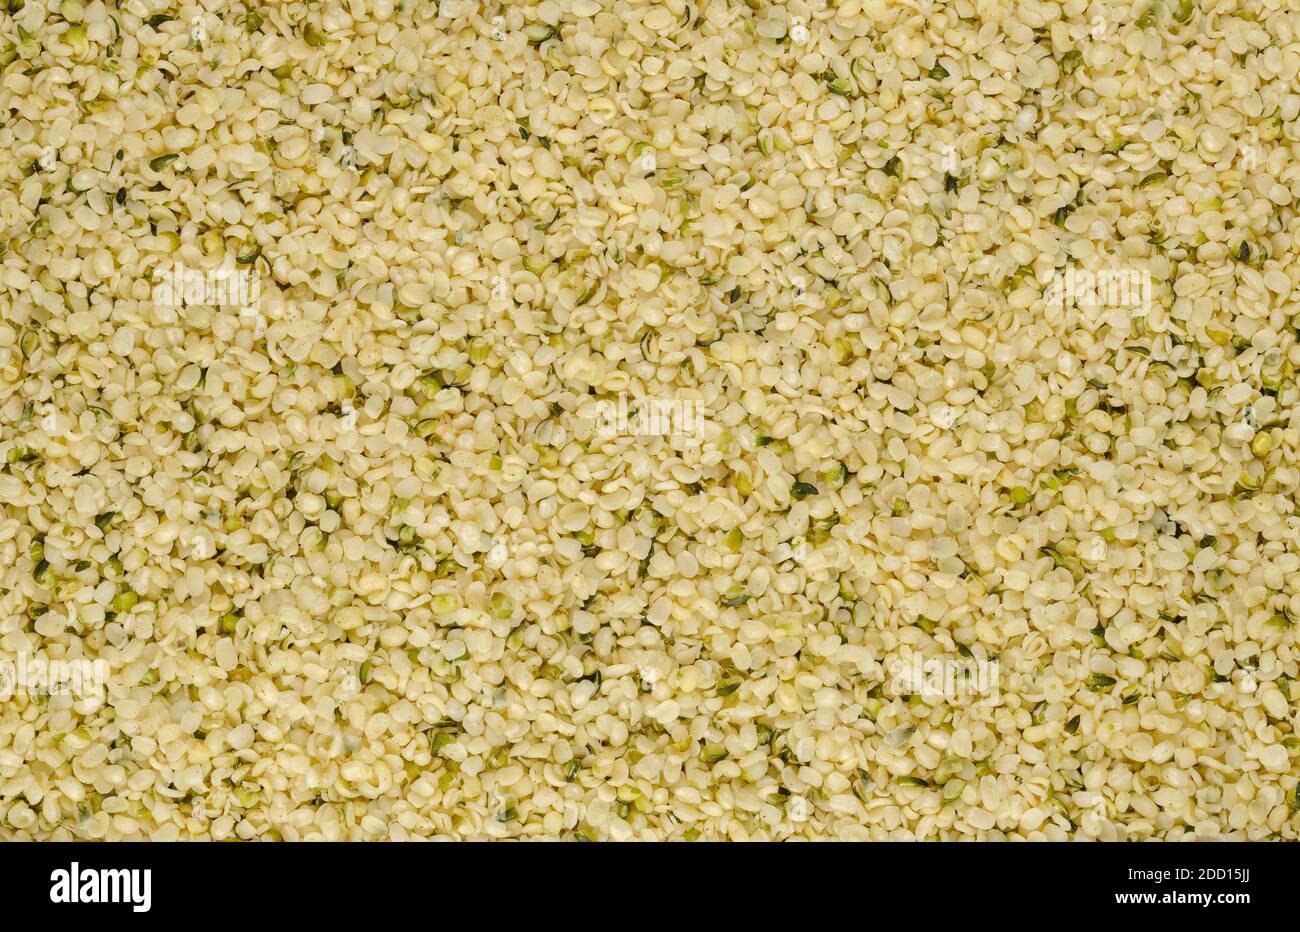 Hulled hemp seeds. Surface and background of raw and edible hempseeds.  Cannabis sativa, high in complete protein and a great source of iron. Stock Photo